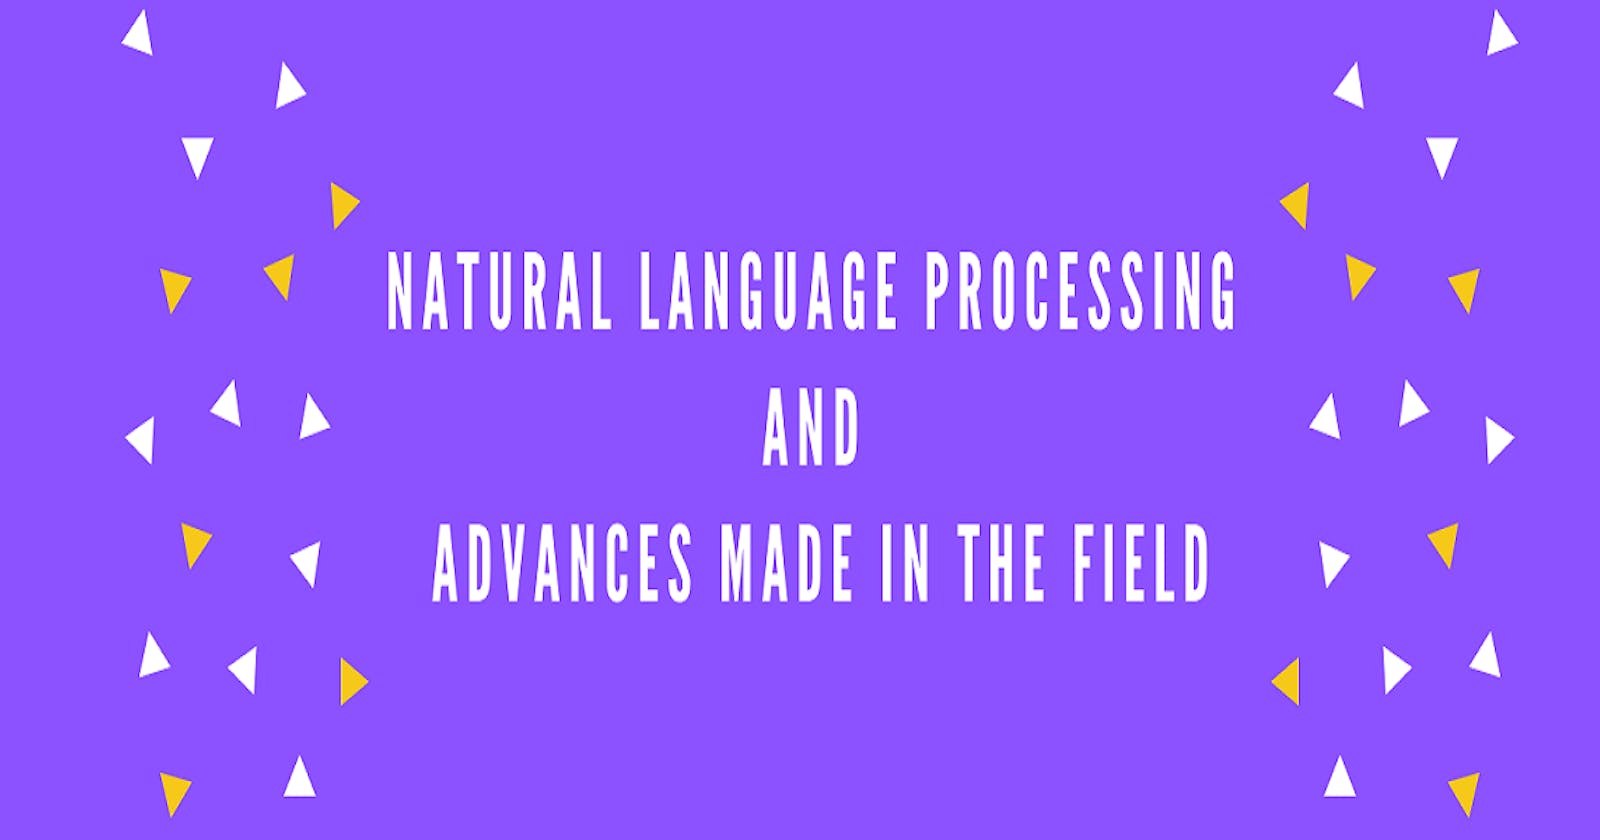 Natural Language Processing and Advances made in the Field